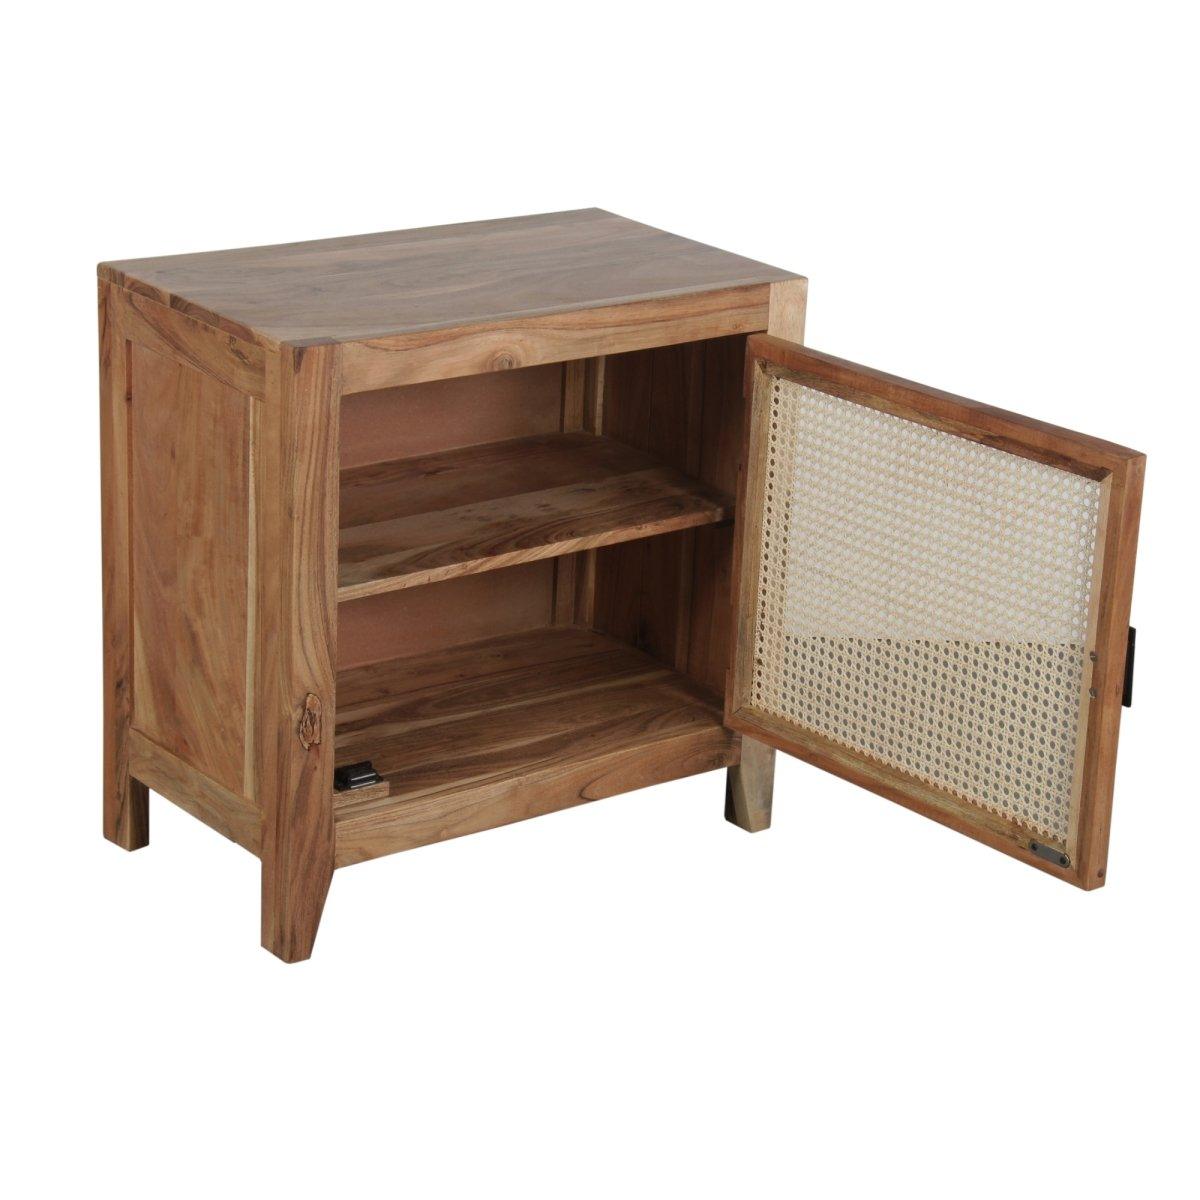 Carmen Cane Nightstand - Rustic Furniture Outlet